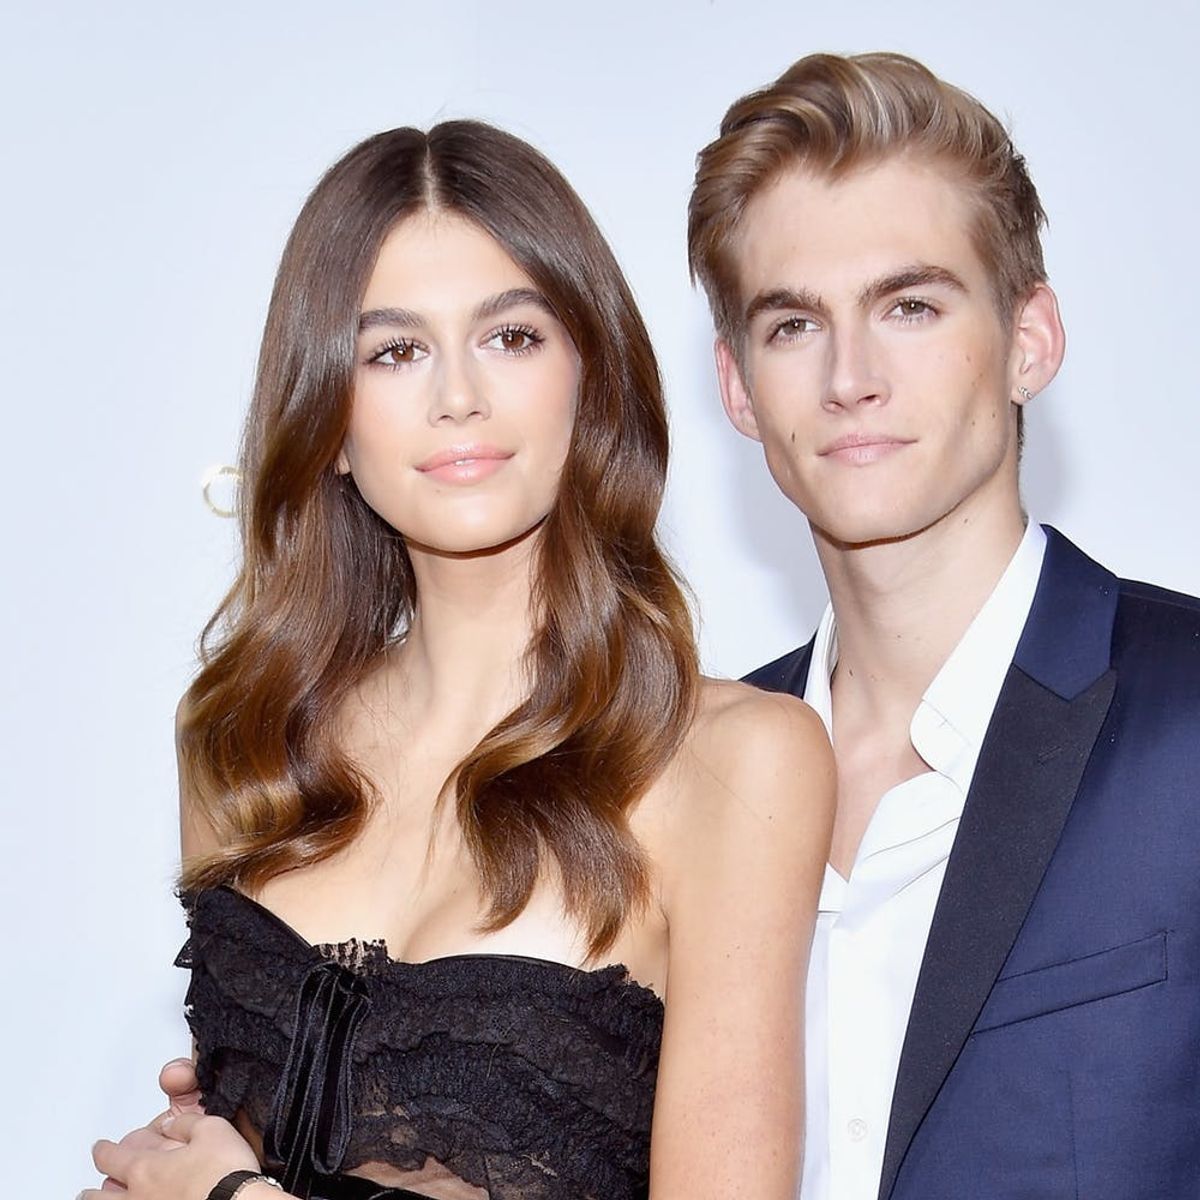 Kaia Gerber’s Brother Just Got Her Name Tattooed on His Arm